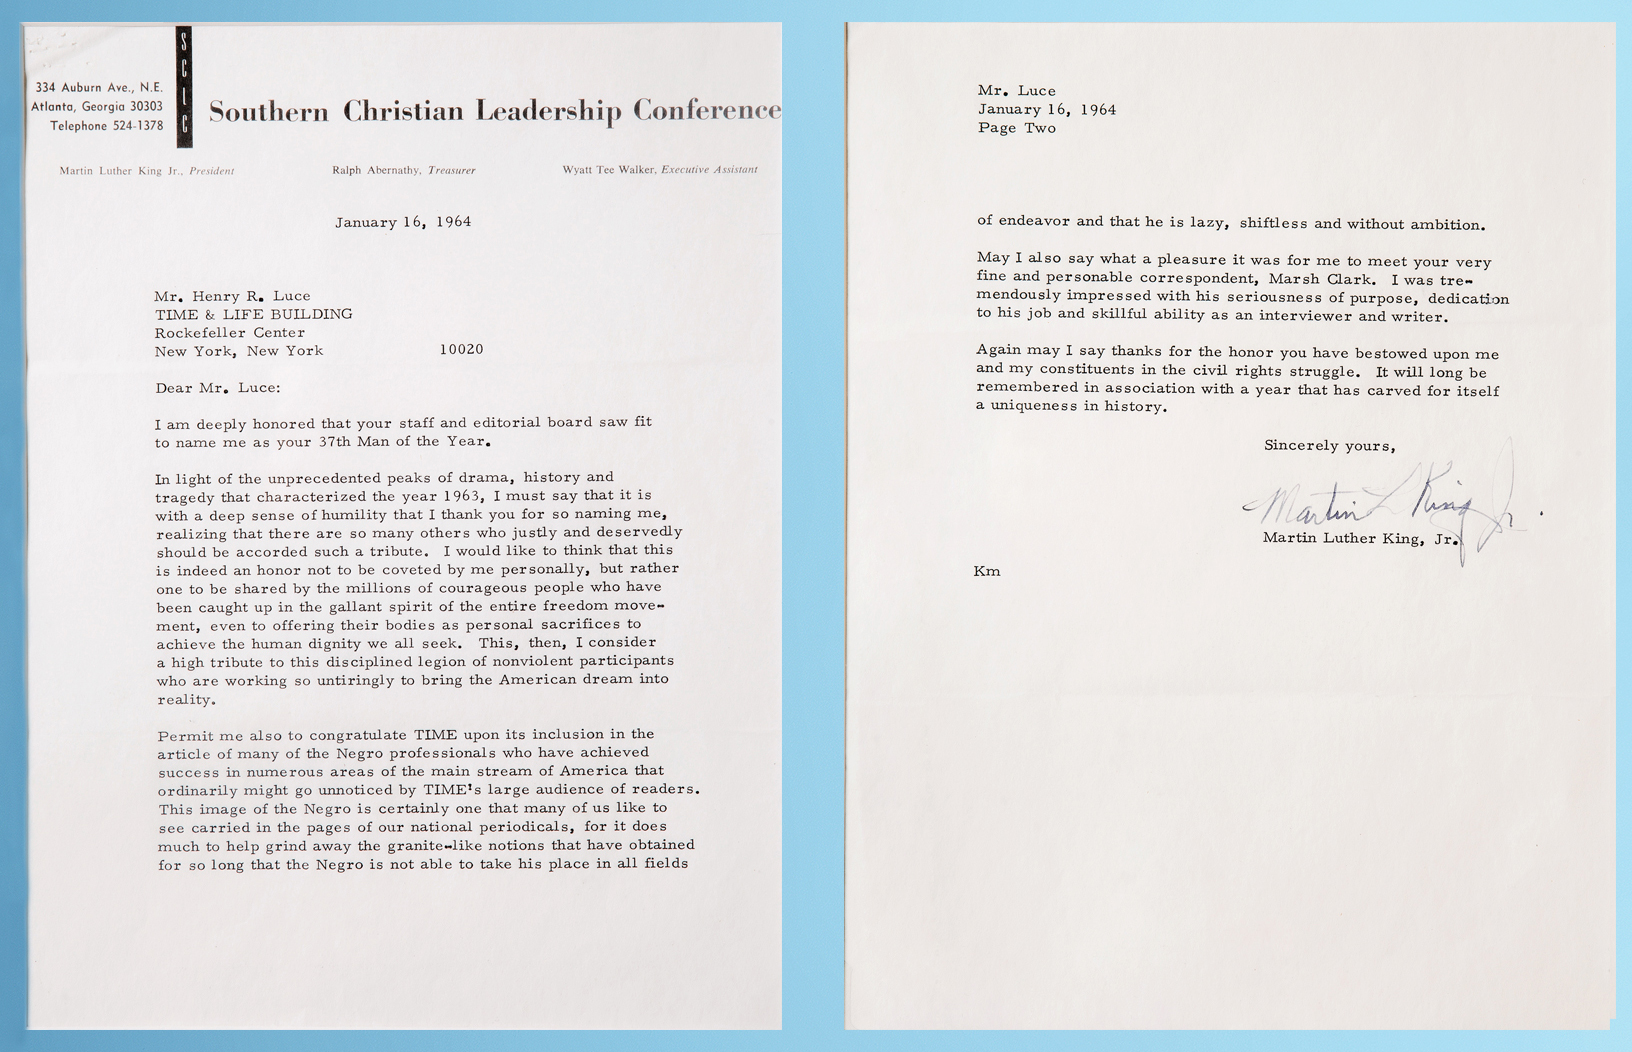 Martin Luther King, Jr. wrote this letter thanking Henry Luce for TIME's decision to name the civil rights leader as the Man of the Year in 1963. The March on Washington had just taken place that August, where Rev. King, TIME's first black Person of the Year, delivered the famous “I Have a Dream” speech. (Fan Chen for TIME)